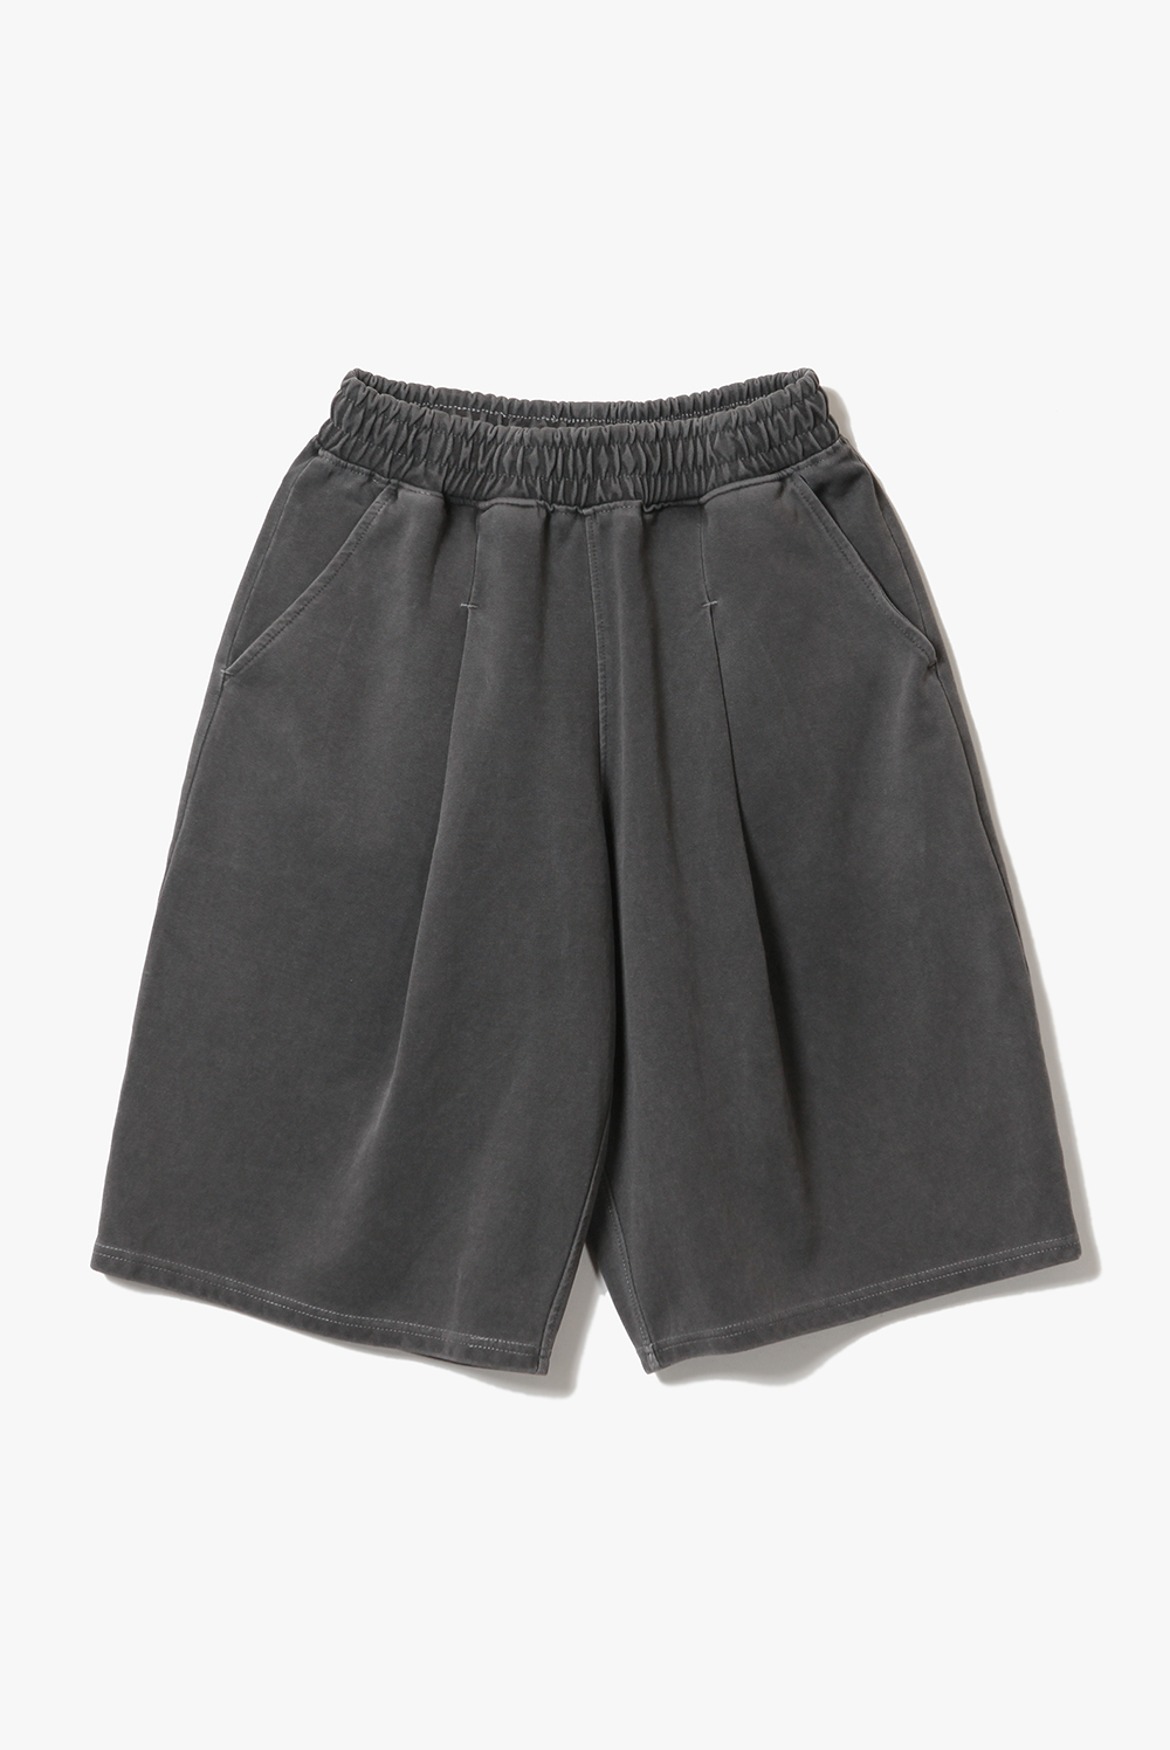 Deep One Tuck Pigment Sweat Shorts [Charcoal]